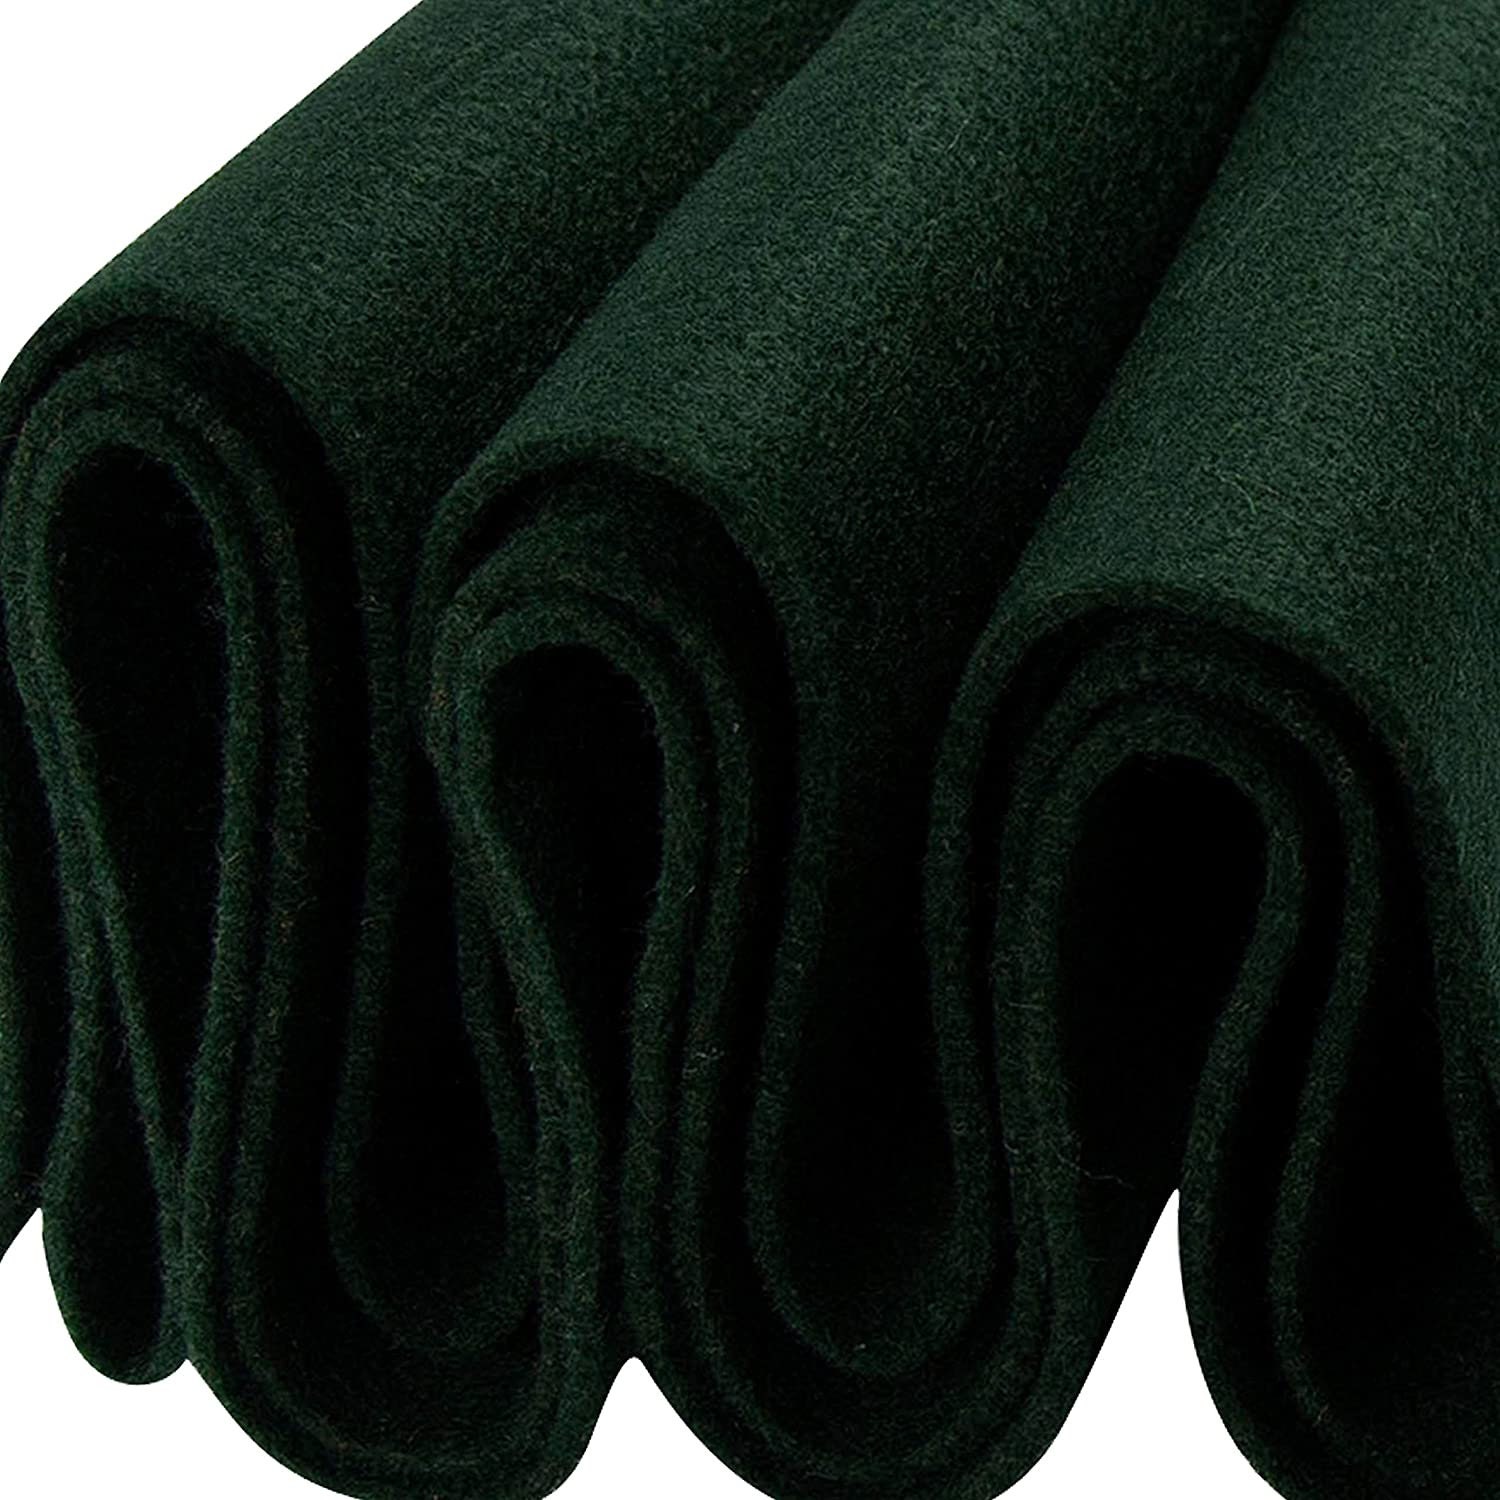 FabricLA Acrylic Felt Fabric - 72 Inch Wide 1.6mm Thick Felt by The Yard -  Use Soft Felt Sheets for Sewing, Cushion, and Padding, DIY Arts & Crafts (8  Yards, Hunter Green)